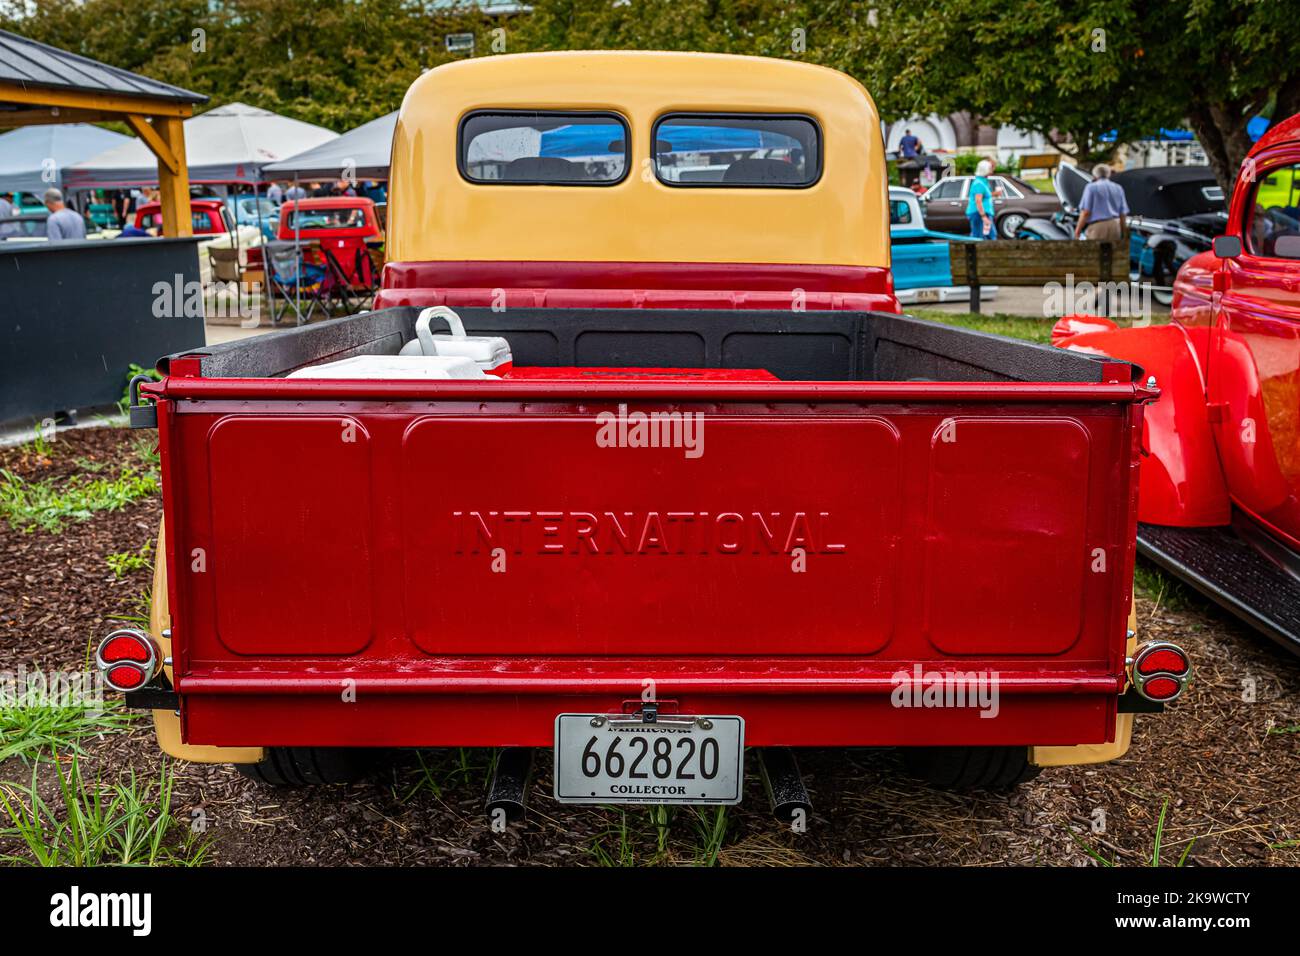 Des Moines, IA - July 01, 2022: High perspective rear view of a 1952 International Harvester L110 Pickup Truck at a local car show. Stock Photo